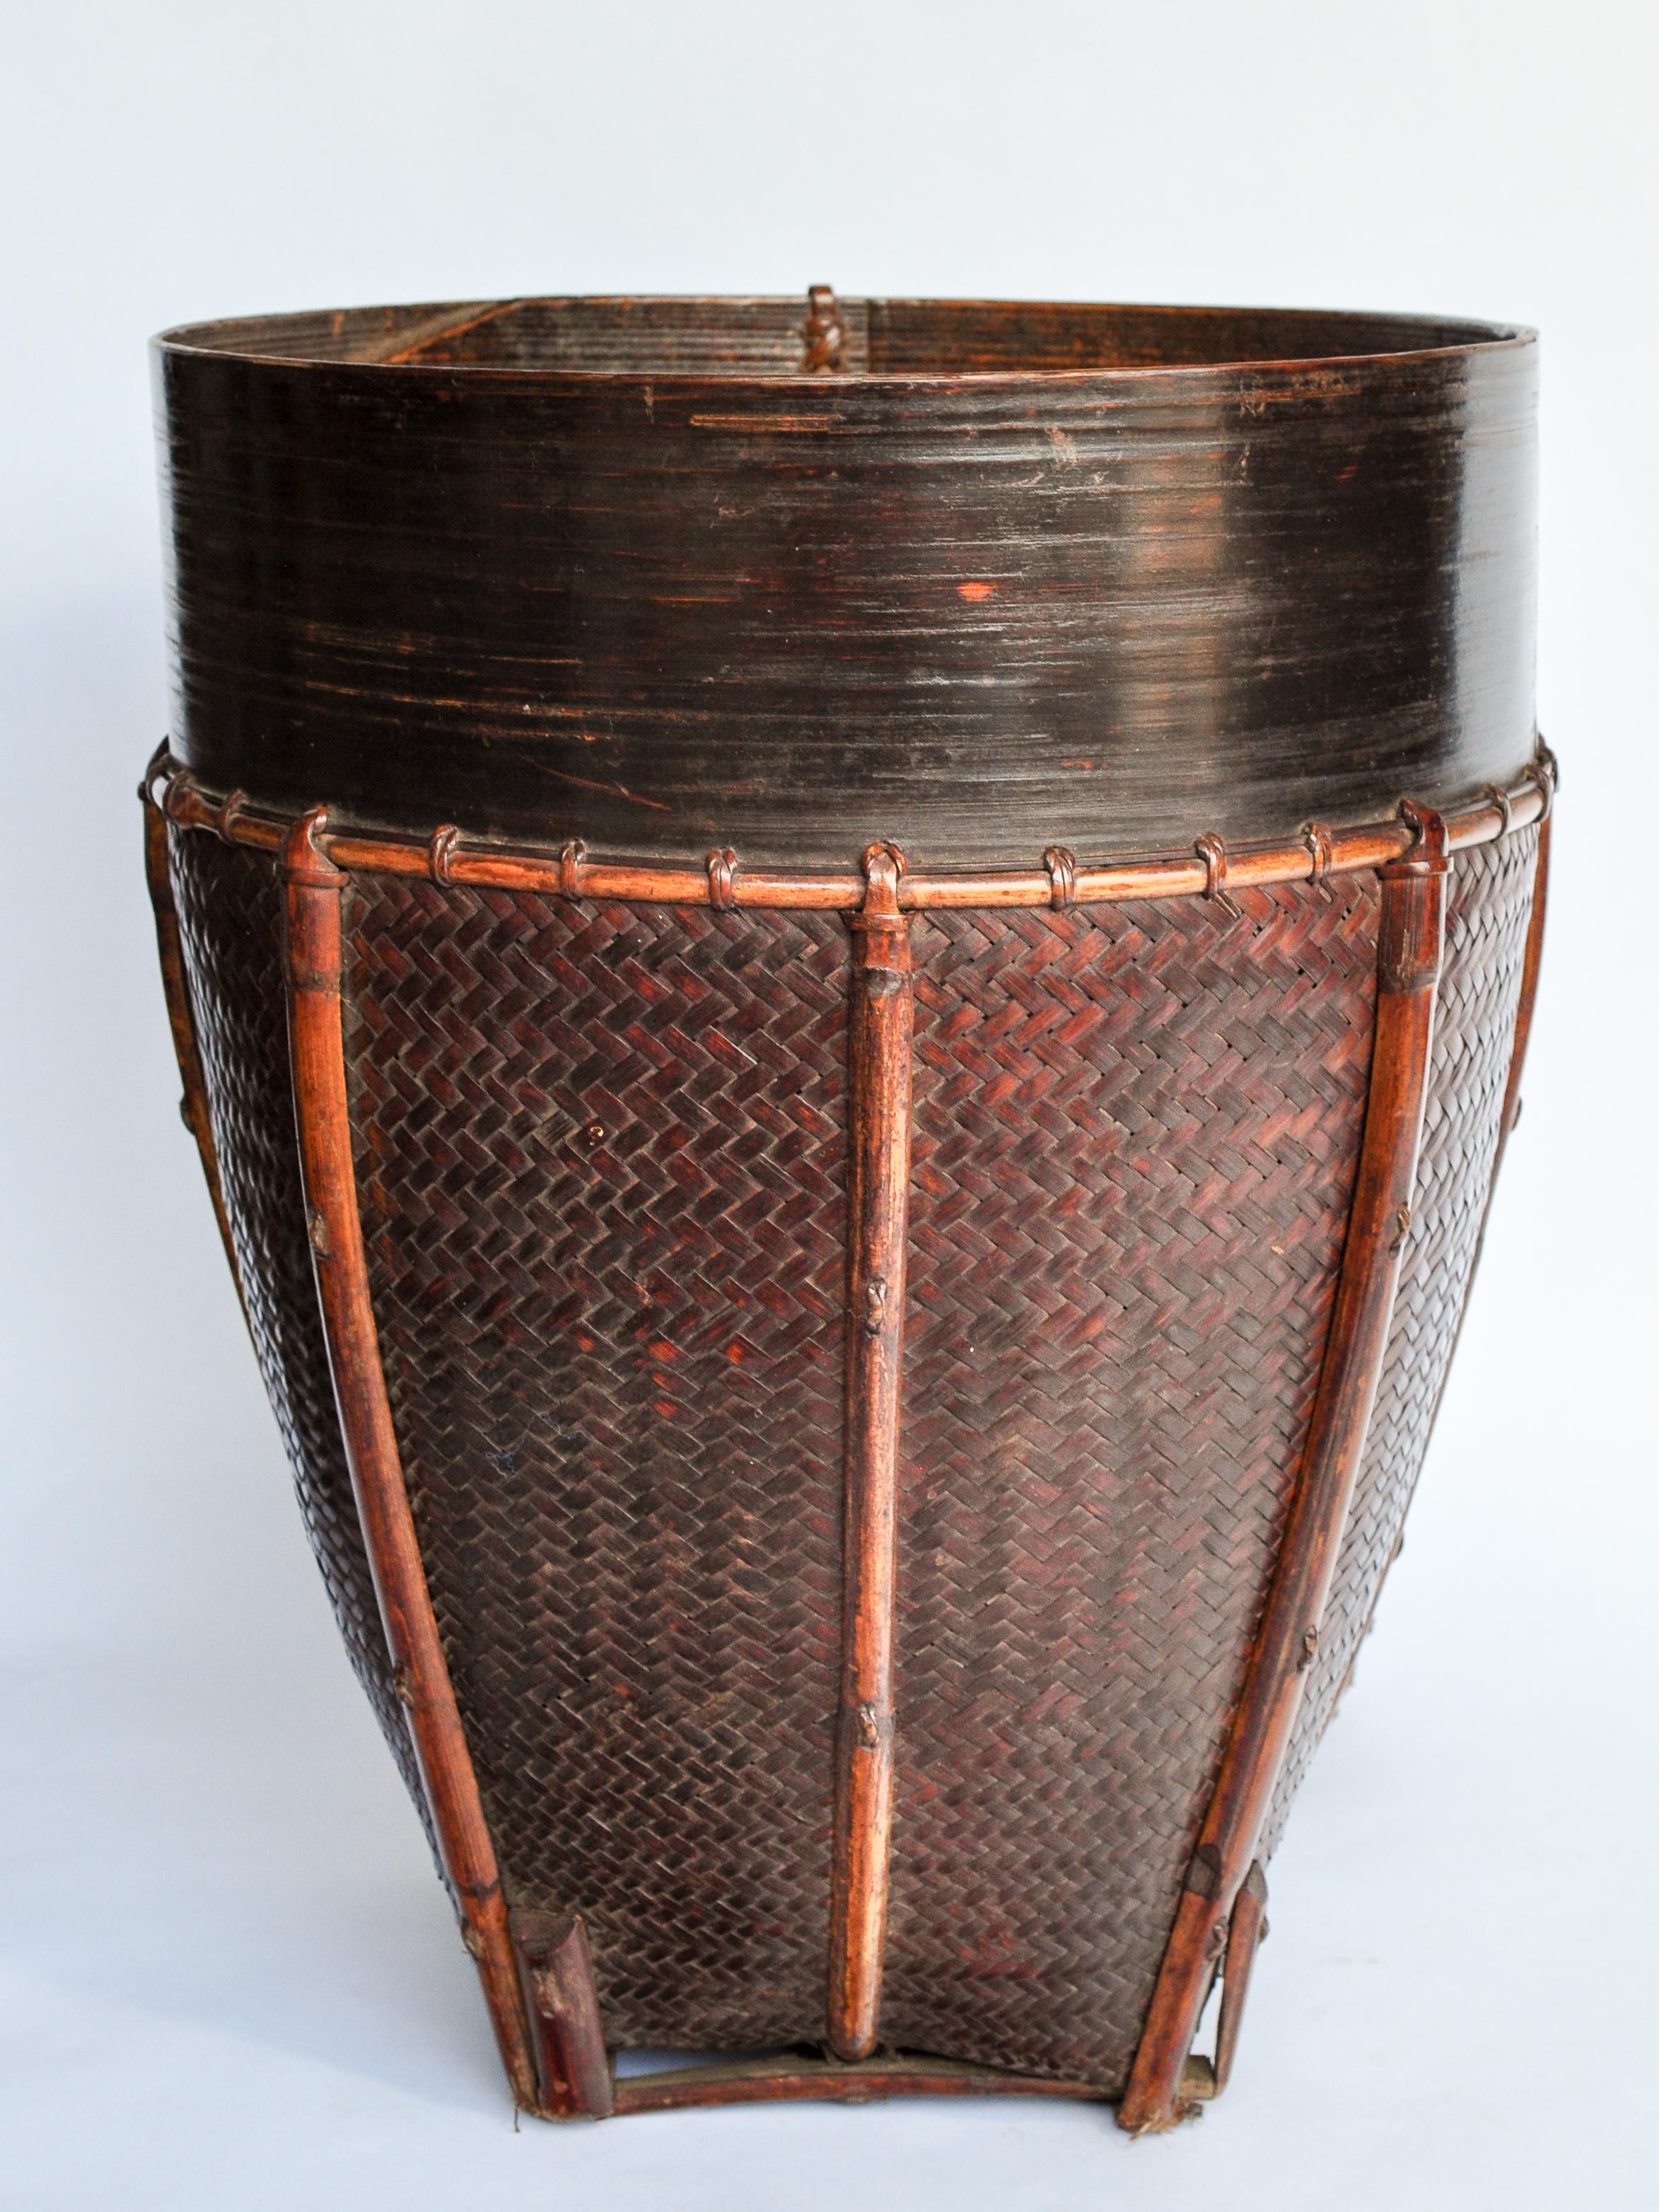 Bamboo Vintage Carrying and Storage Basket Rawang People of Burma, Mid-20th Century